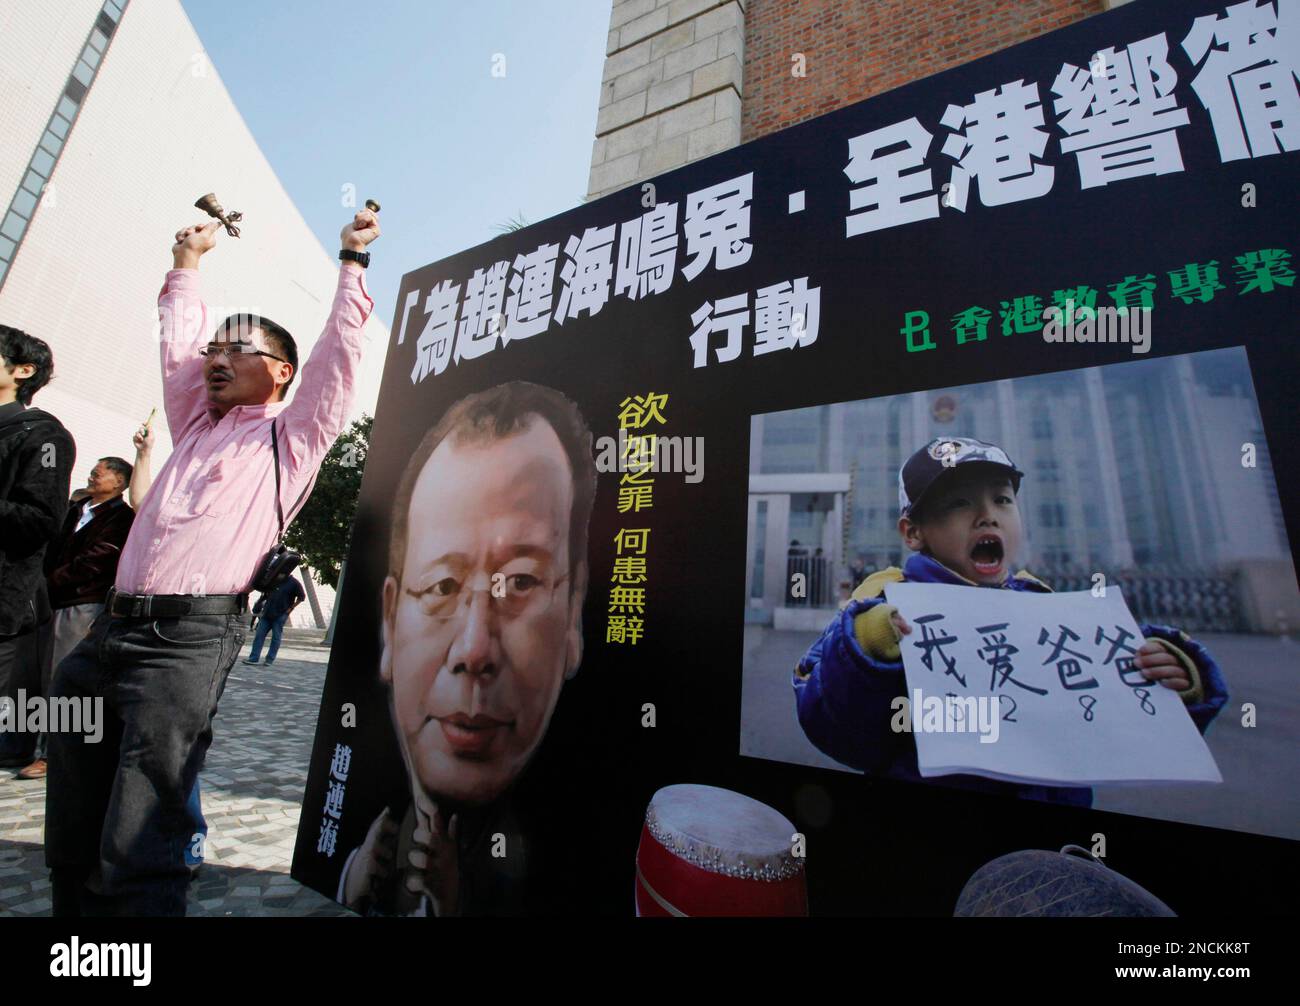 Pro-democracy protesters play music instruments and make loud voice in front of the picture of Zhao Lianhai with the Chinese words reading "To cry for redress an injustice for Zhao Lianhai, screams pierce the sky in Hong Kong" during a demonstration in Hong Kong Saturday, Nov. 27, 2010. The Chinese father-turned-activist imprisoned for protesting a tainted milk scandal is seeking medical parole, in what might be a deal with authorities hoping to tamp public anger over his harsh sentence. (AP Photo/Kin Cheung) Stock Photo